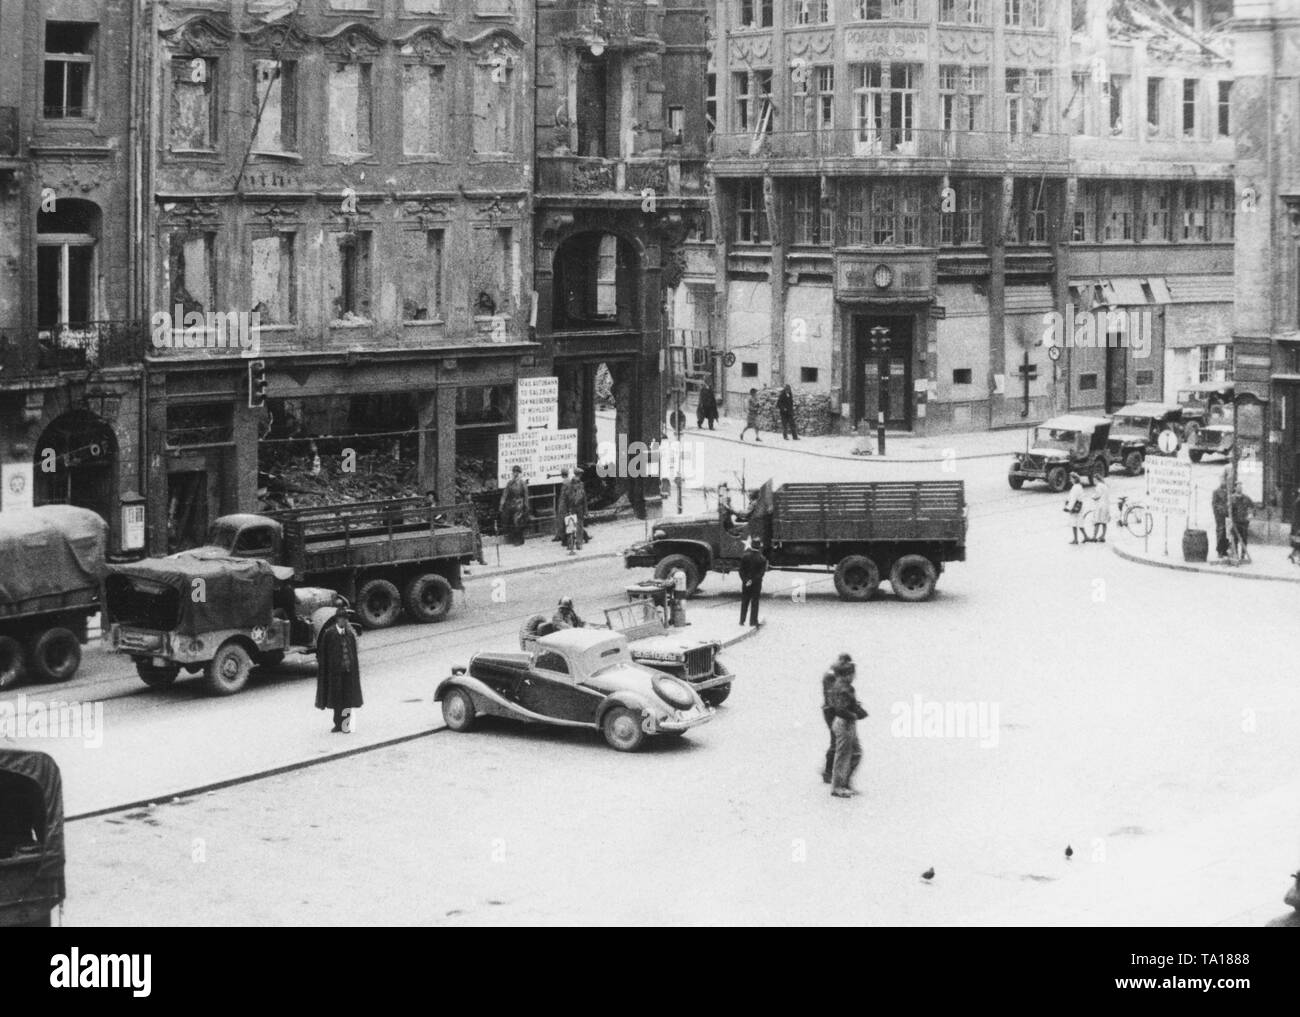 The Munich Marienplatz after the war. Here the Roman Mayer House. The trucks are US Army vehicles. Stock Photo